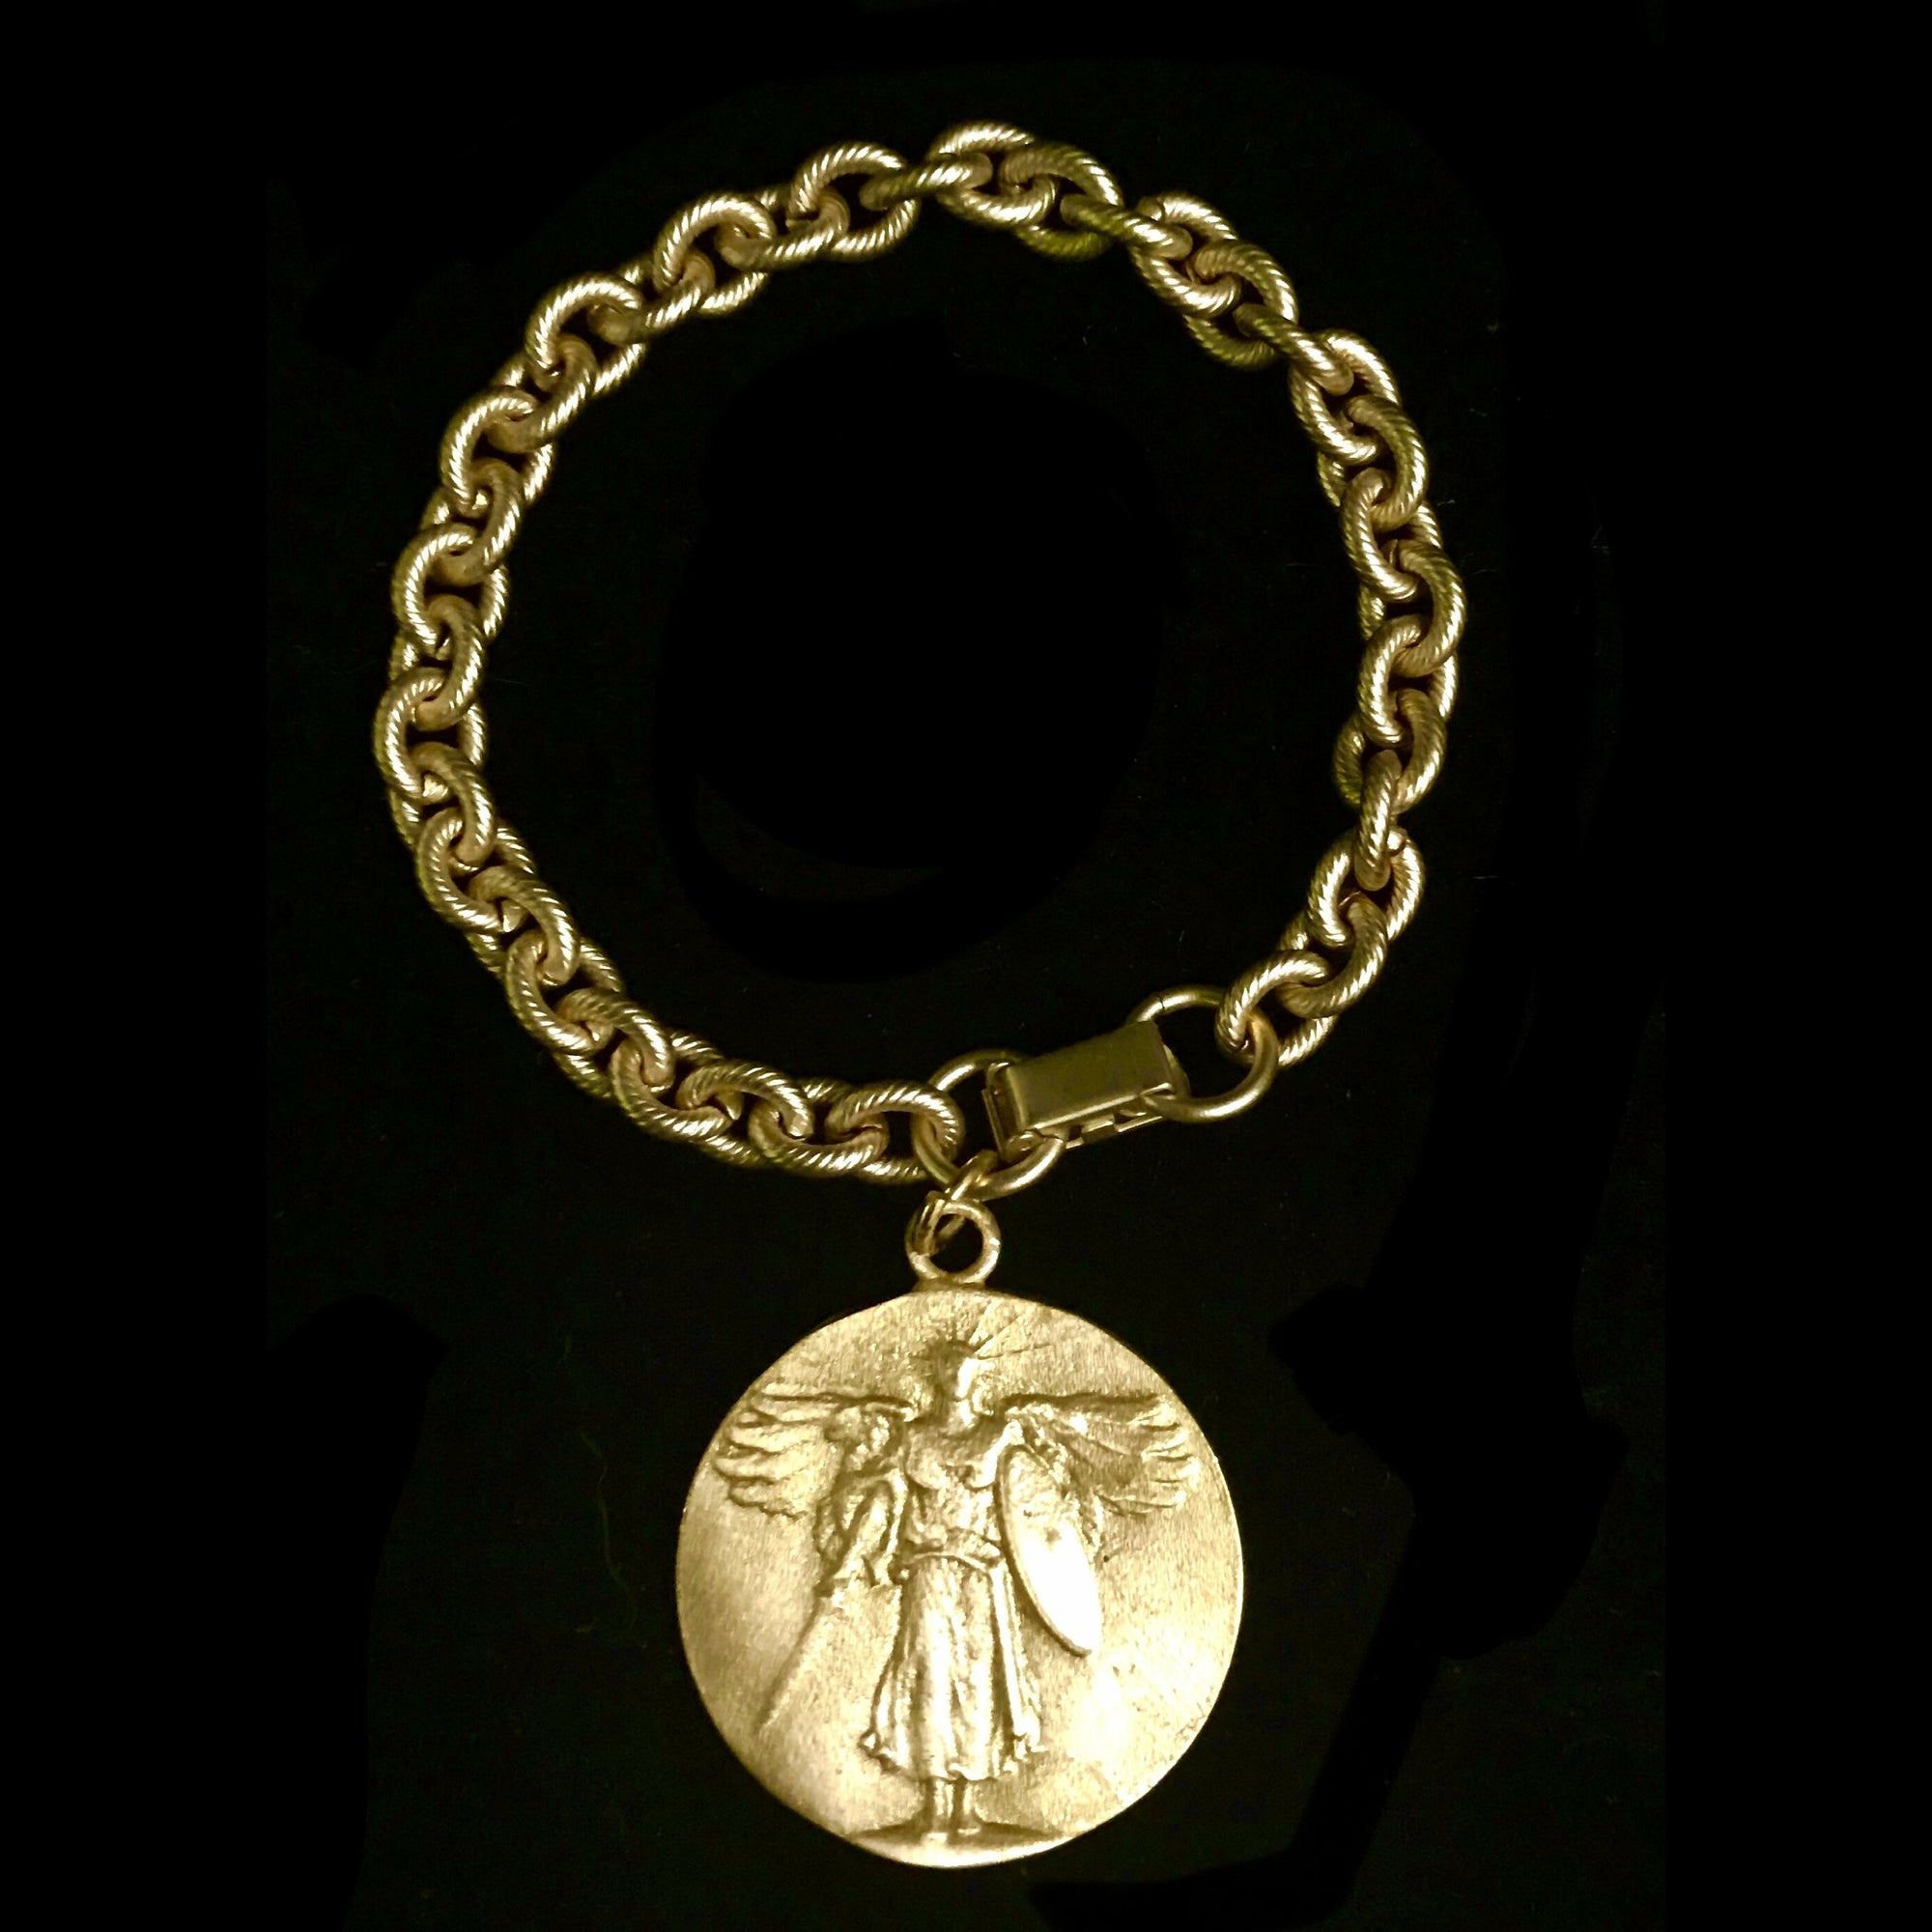 Saint Michael Victory Cable Link Bracelet by Whispering Goddess - Gold